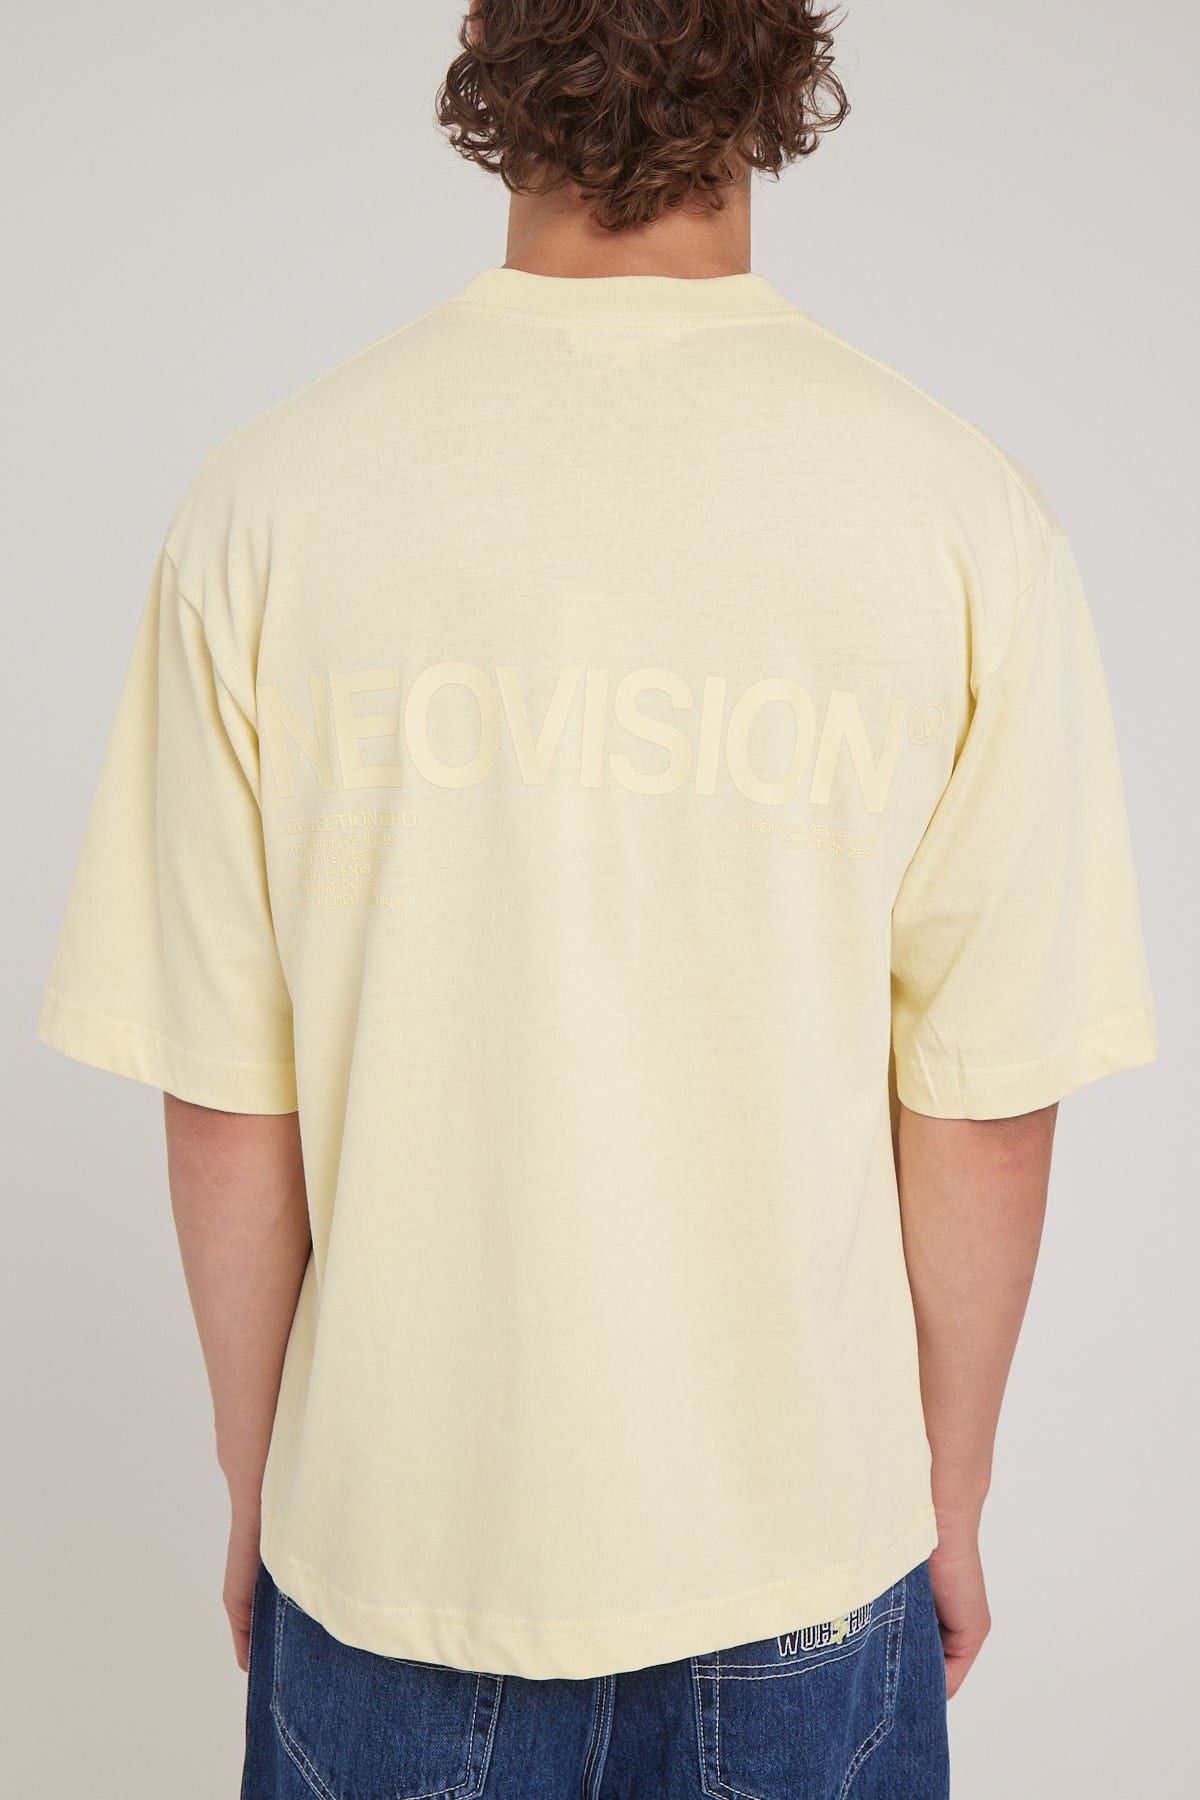 Neovision Curation Street Super Heavy Tee Pale Yellow